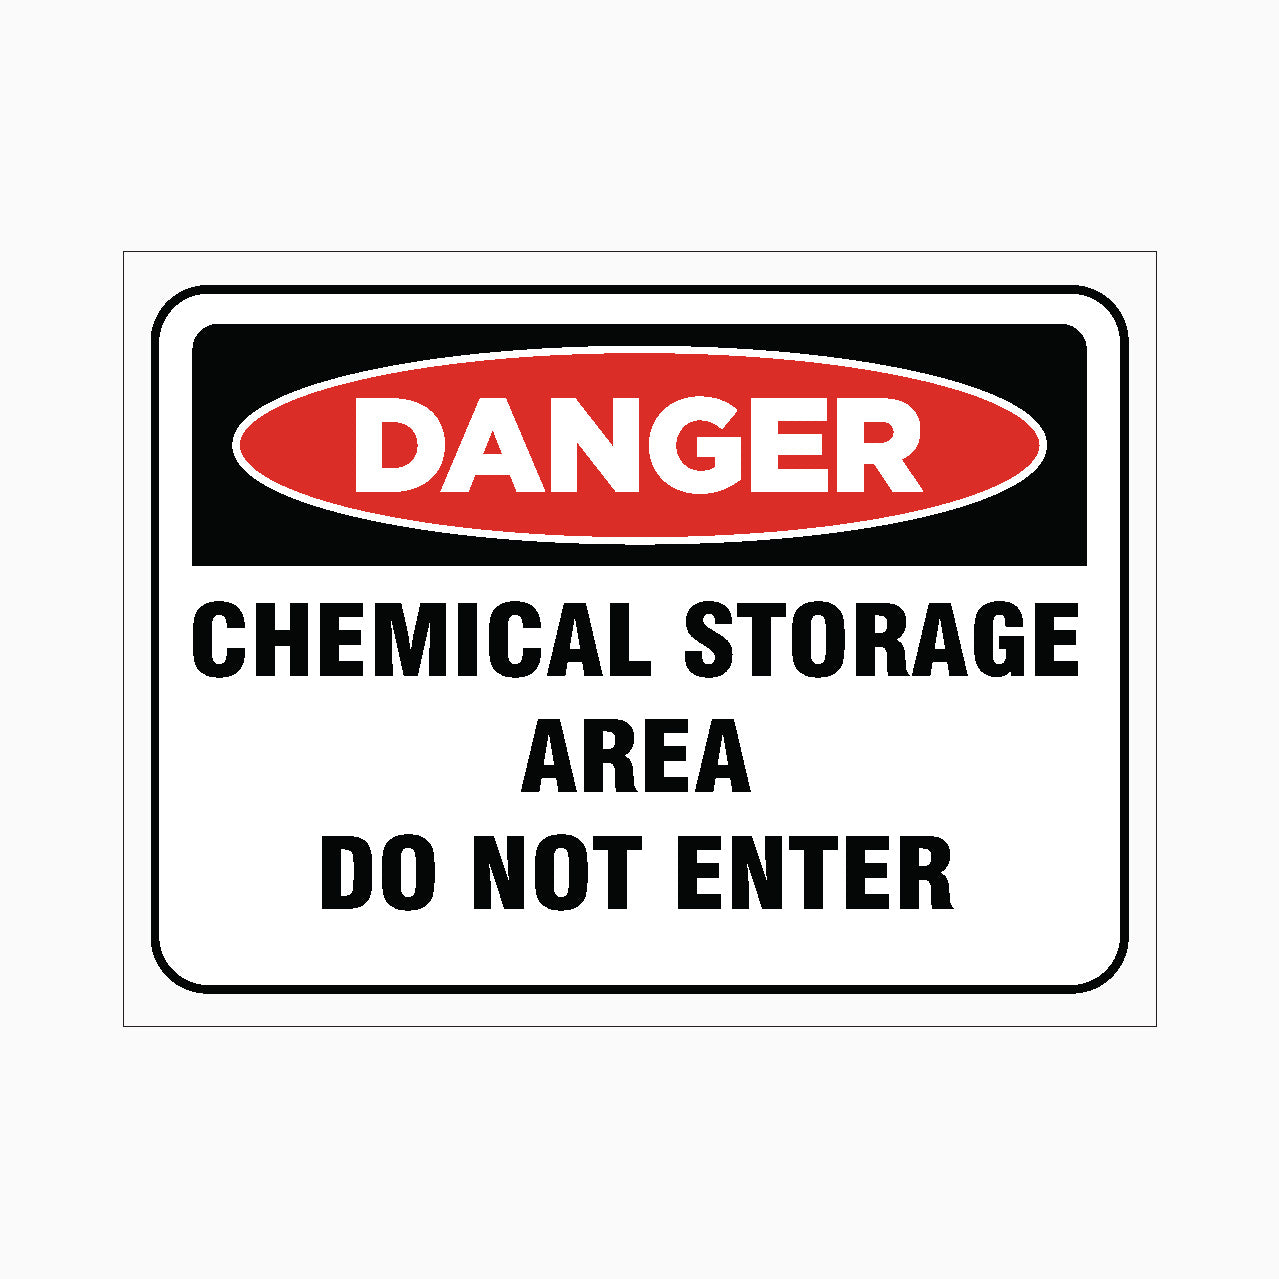 CHEMICAL STORAGE AREA - DO NOT ENTER SIGN